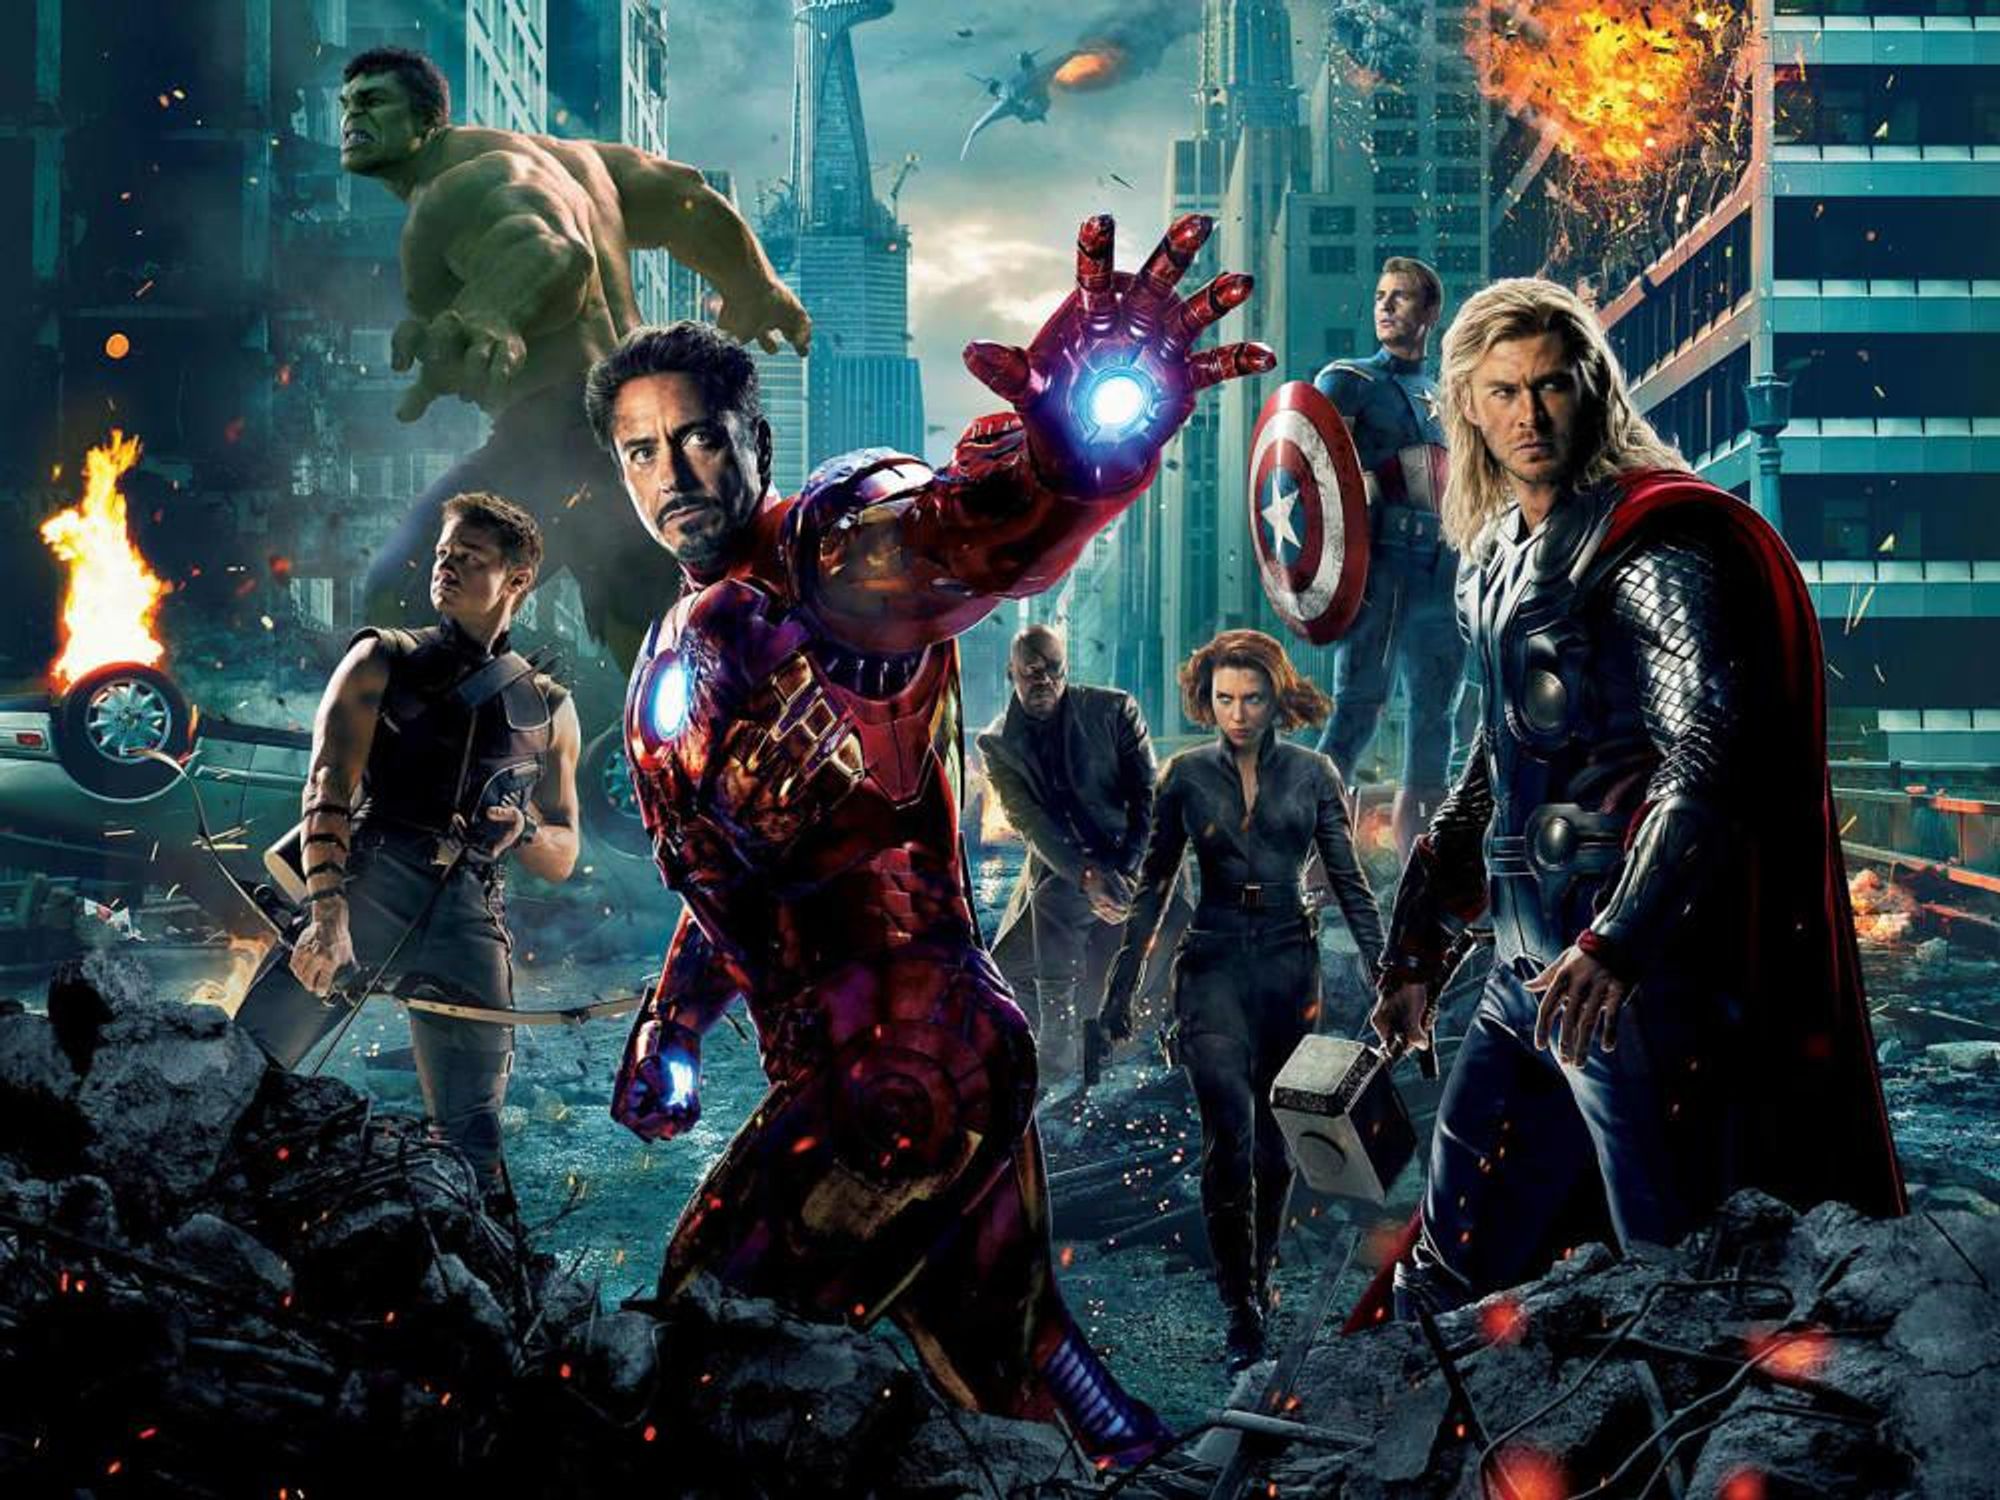 News_The Avengers_2012 movie poster